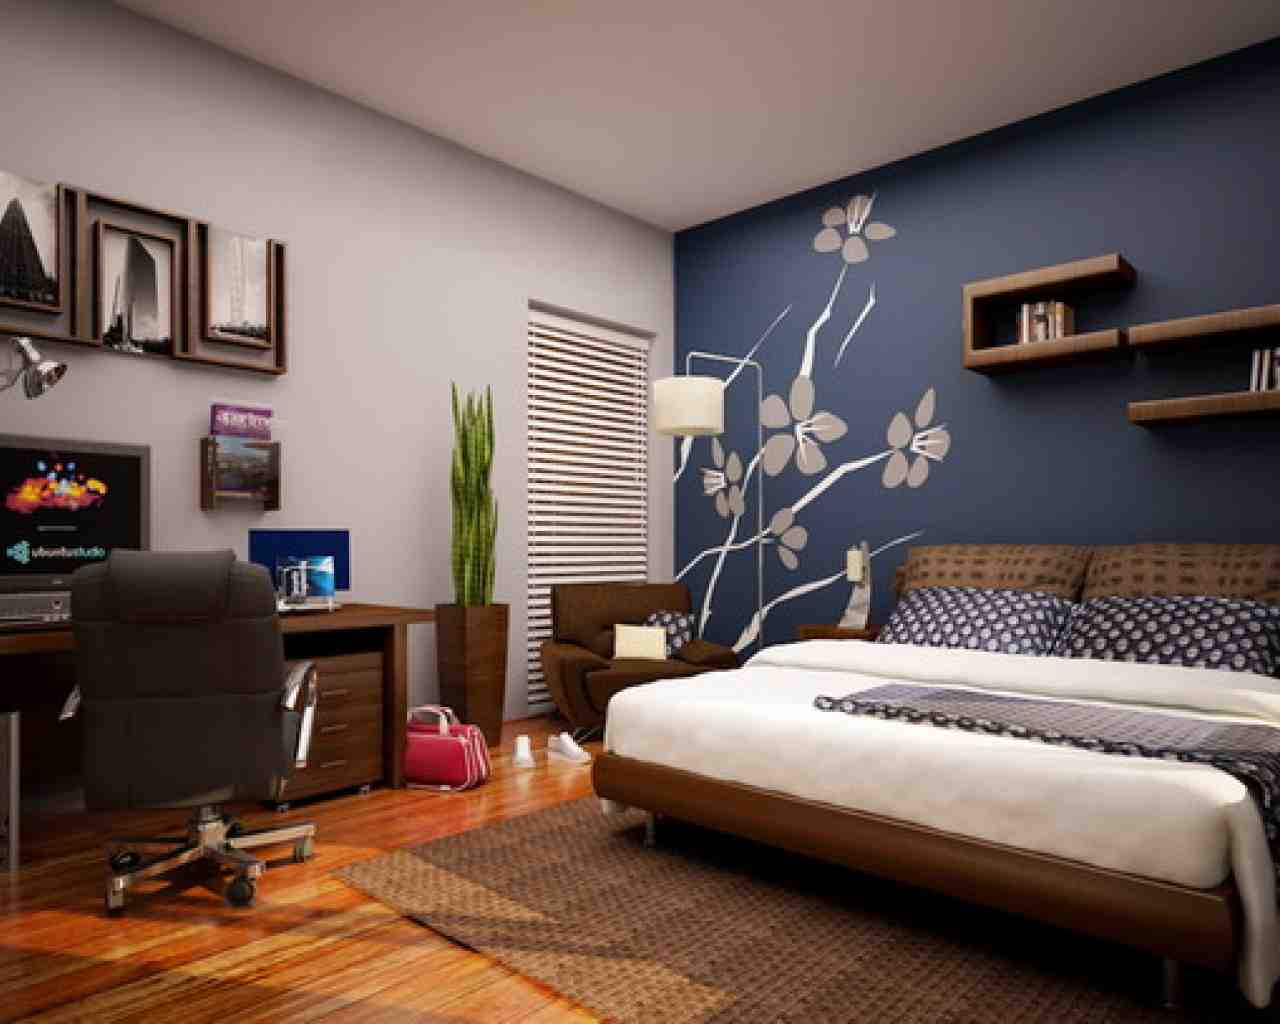 Decorating Bedroom Walls With Fabric